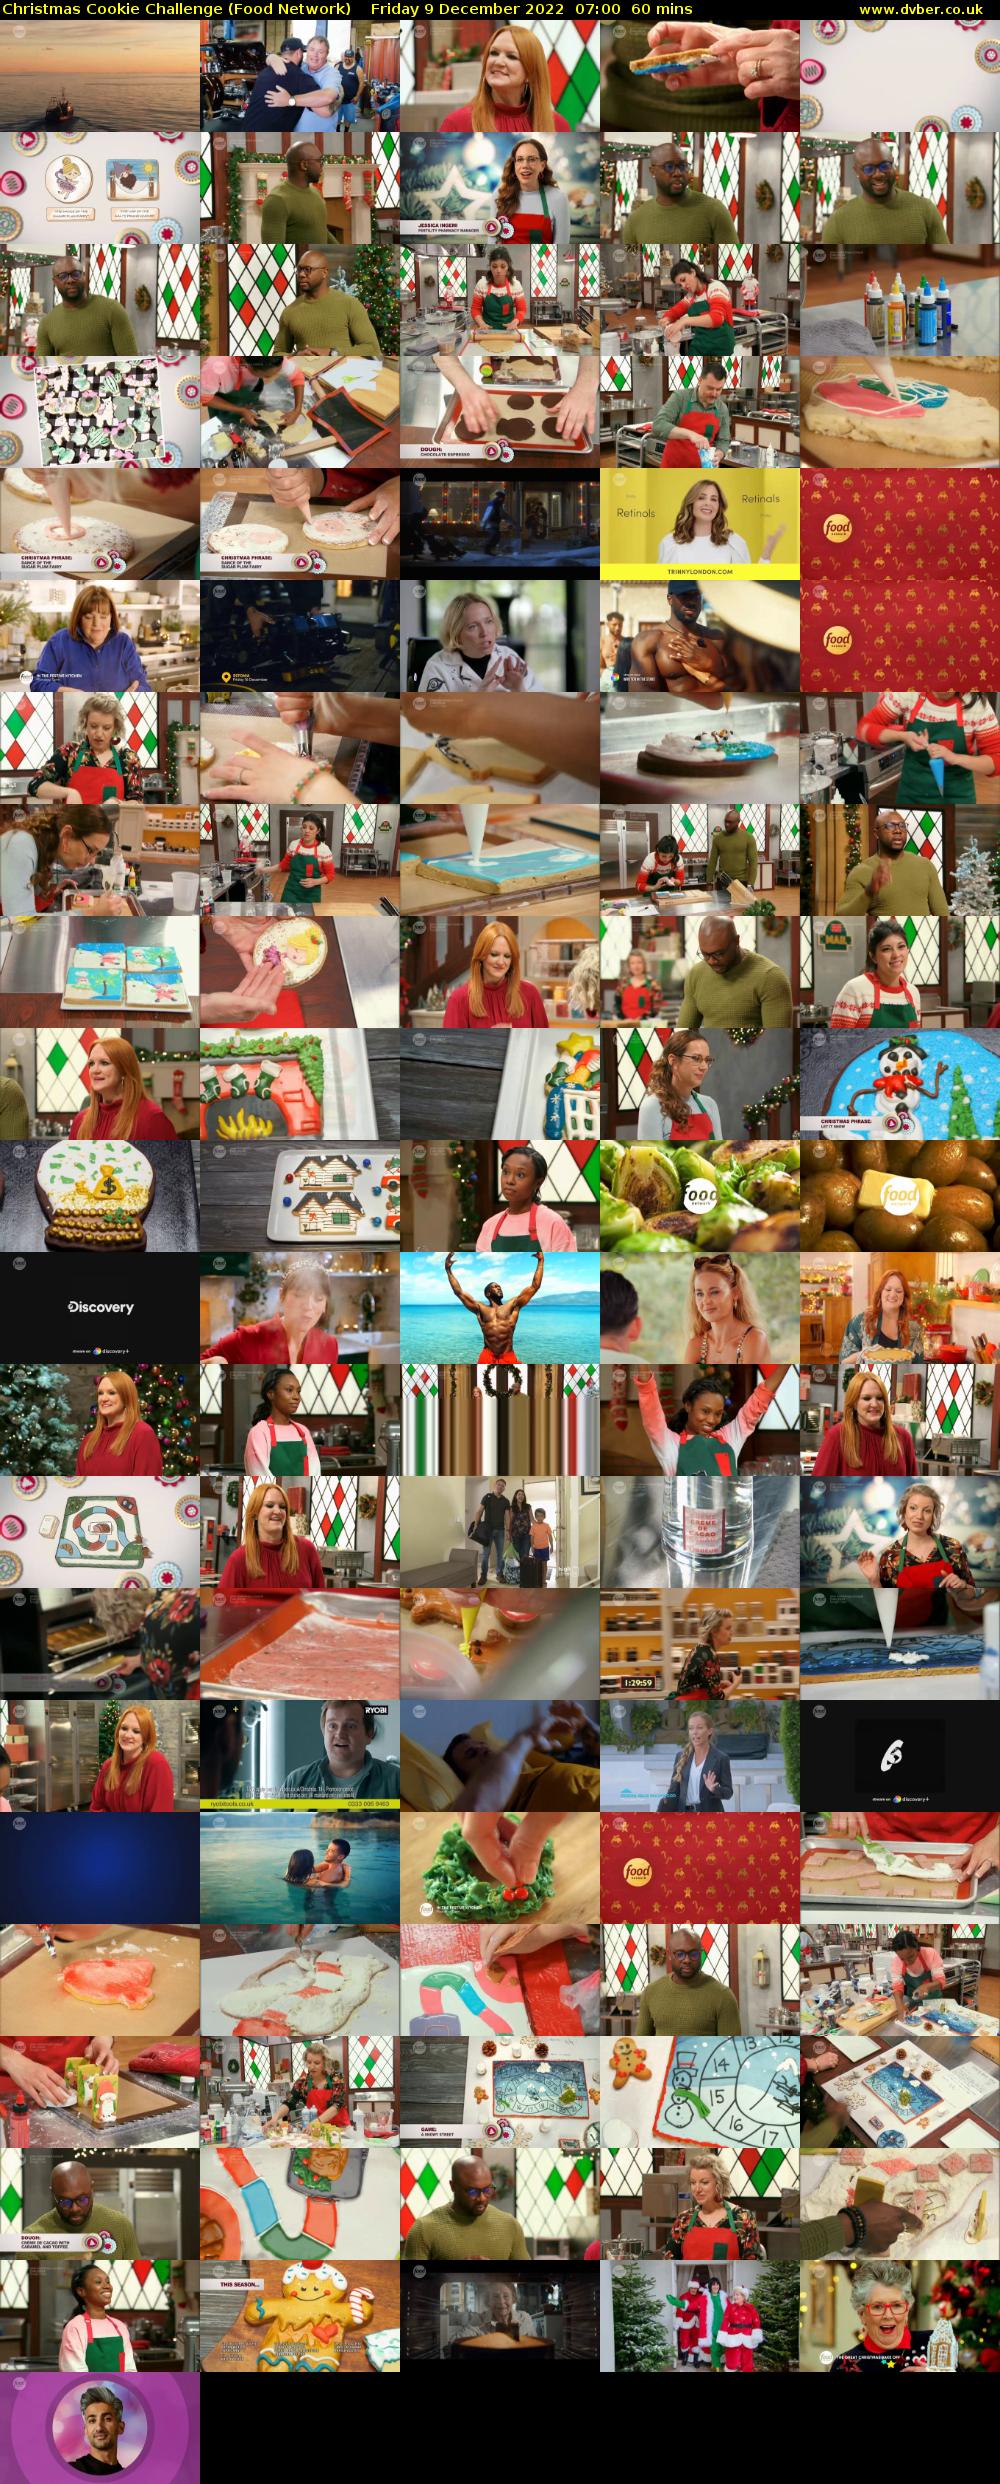 Christmas Cookie Challenge (Food Network) Friday 9 December 2022 07:00 - 08:00